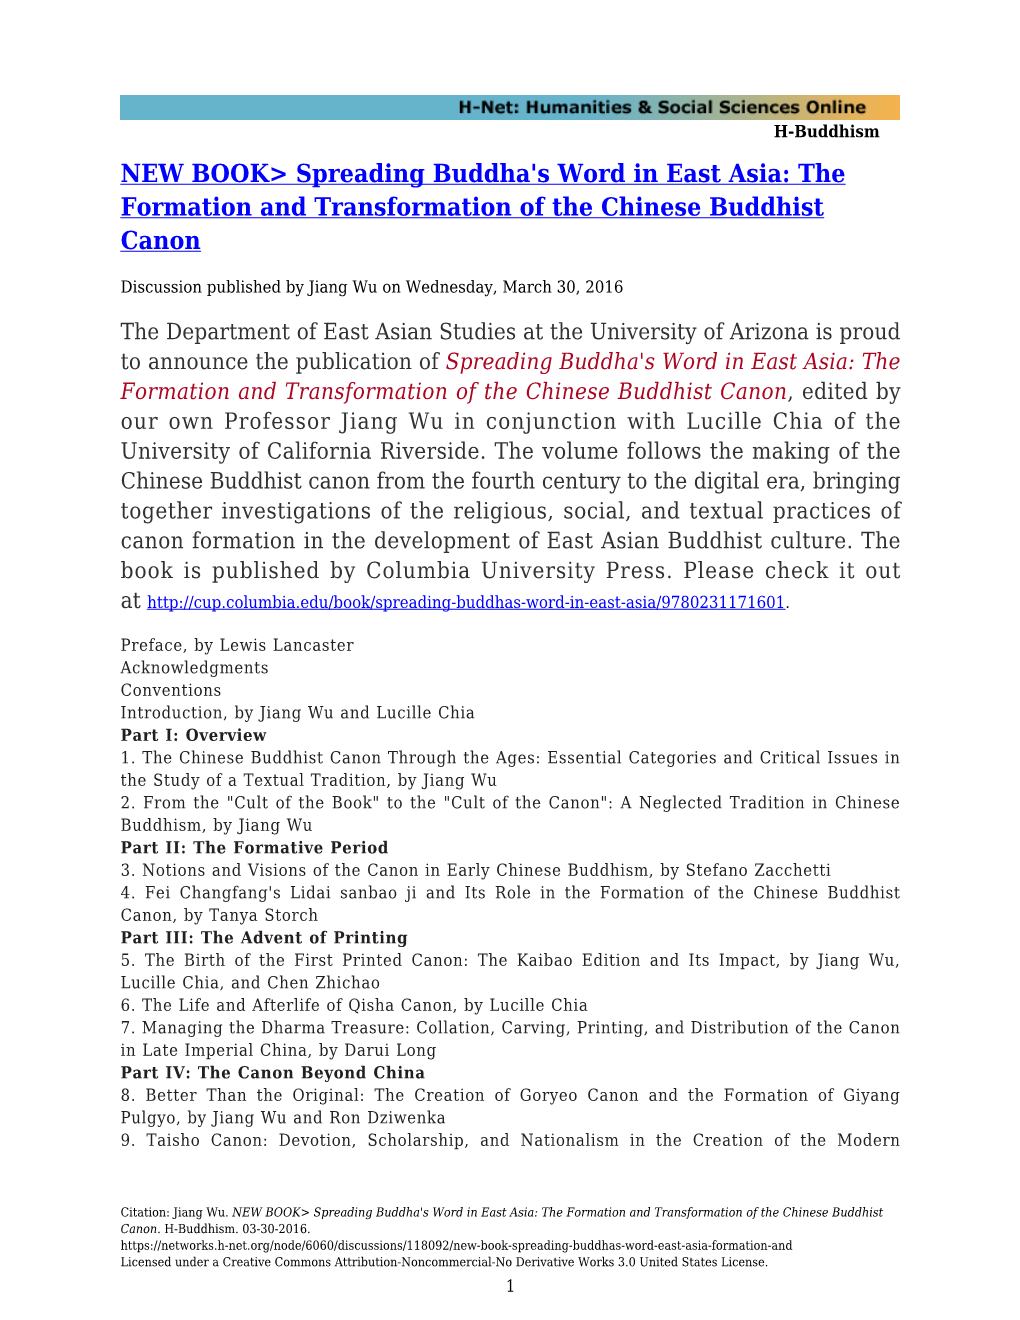 The Formation and Transformation of the Chinese Buddhist Canon